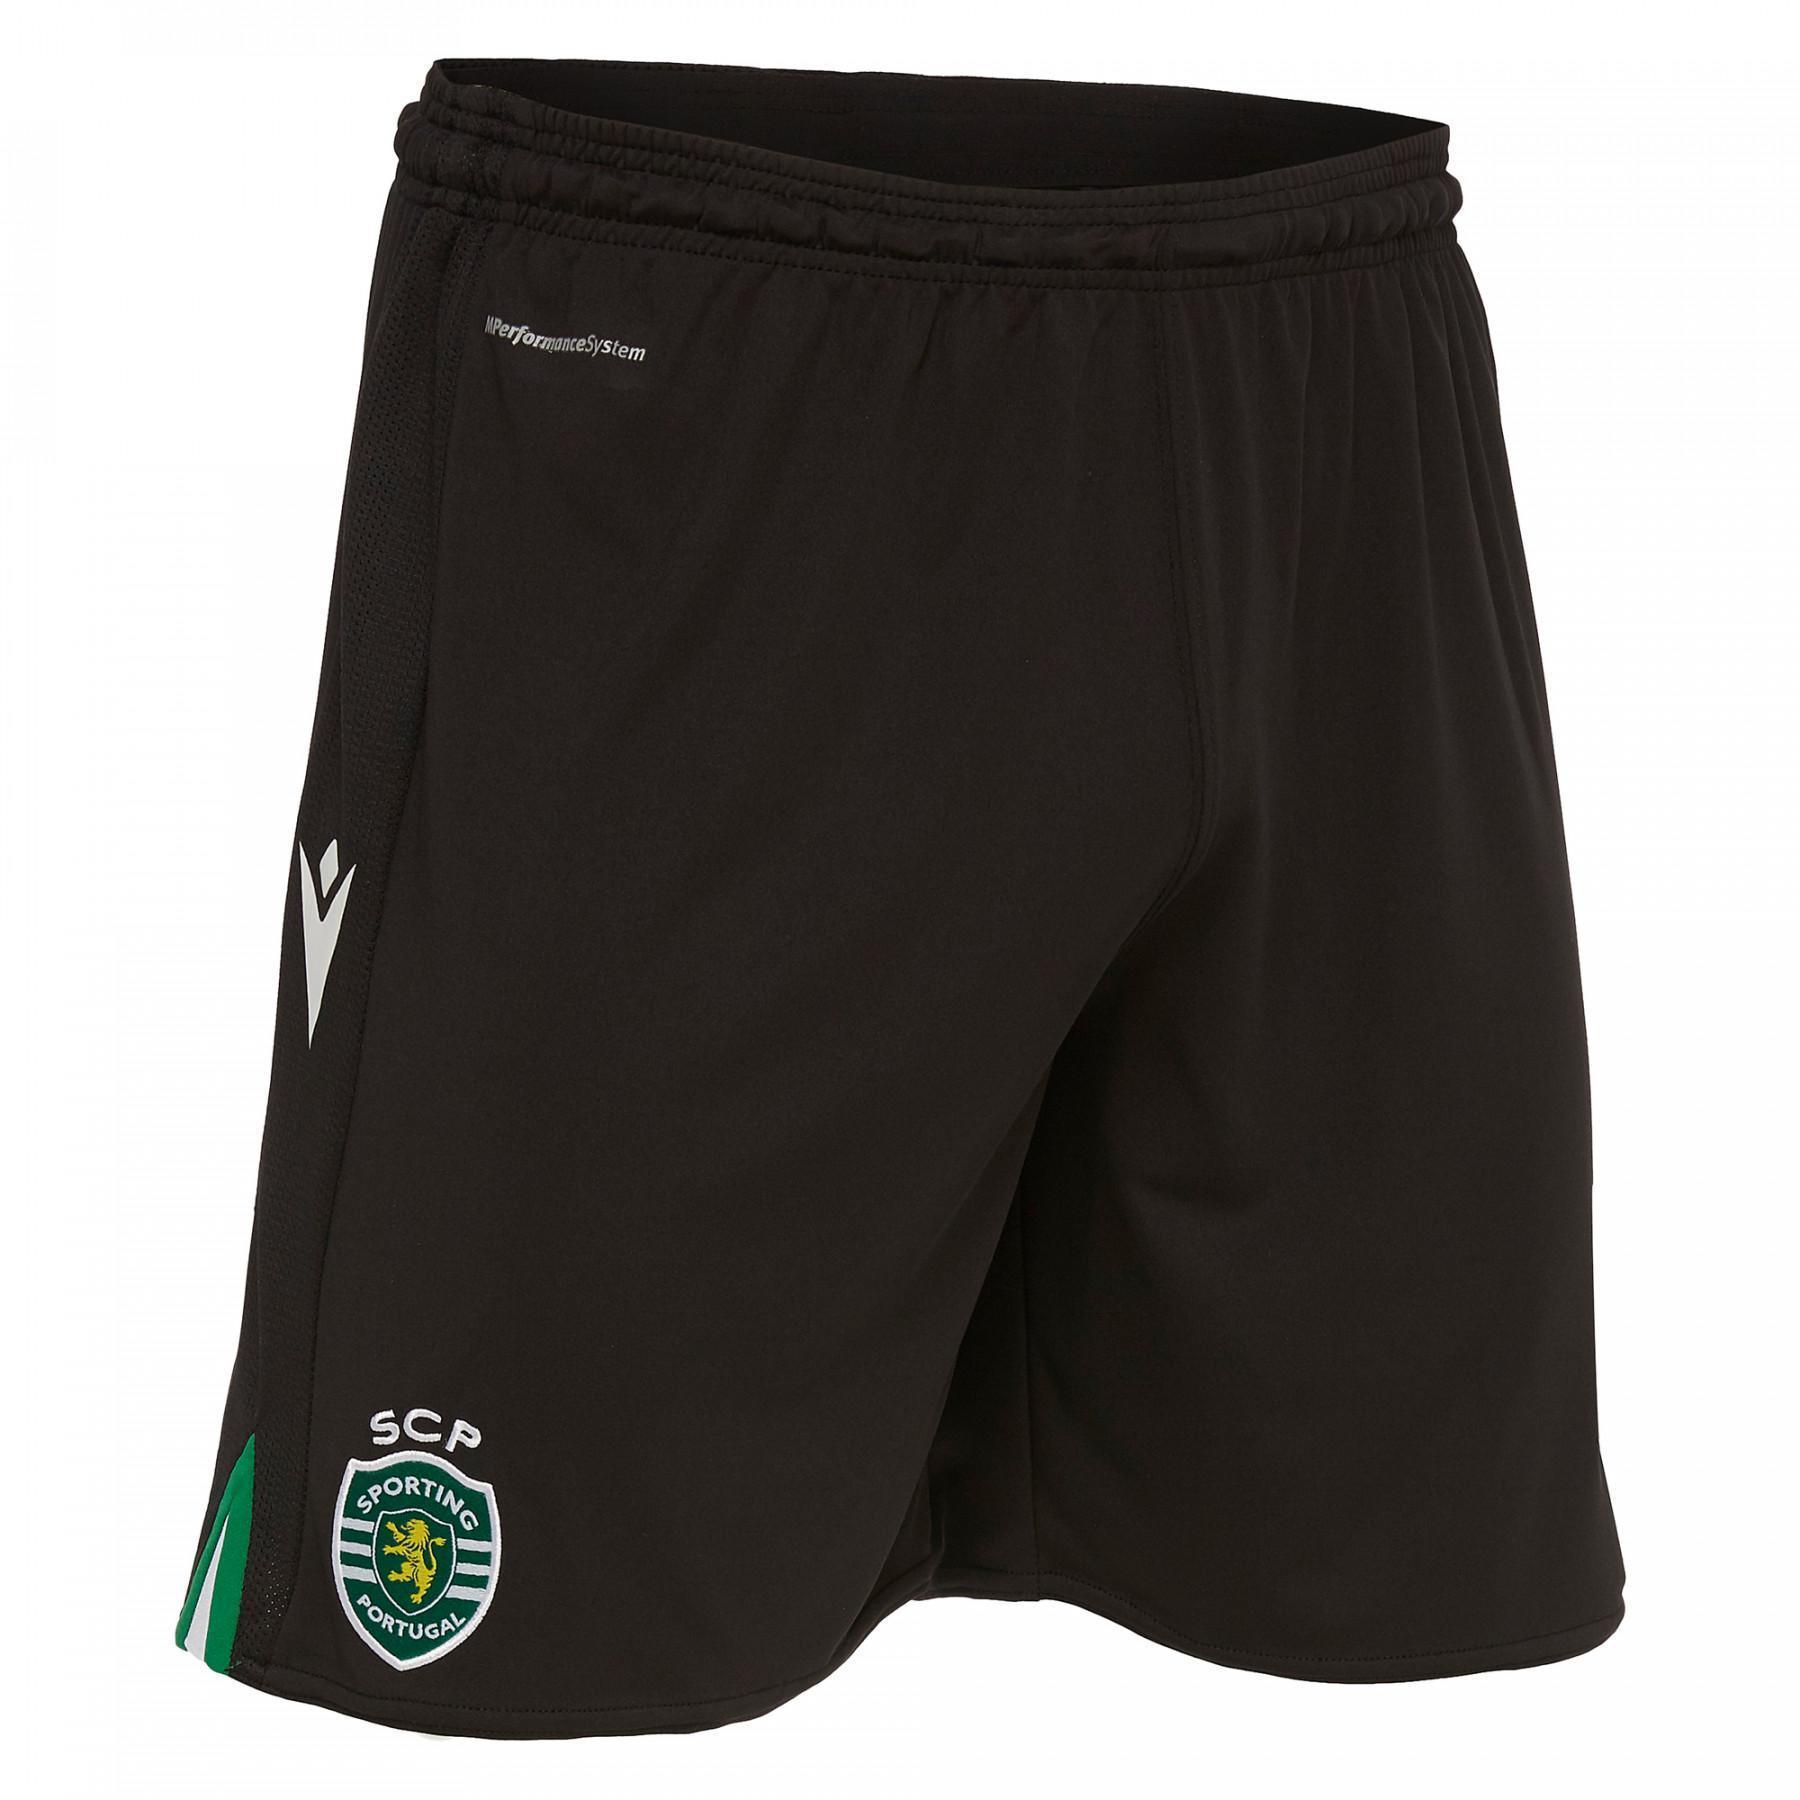 Home shorts Sporting Portugal 19/20